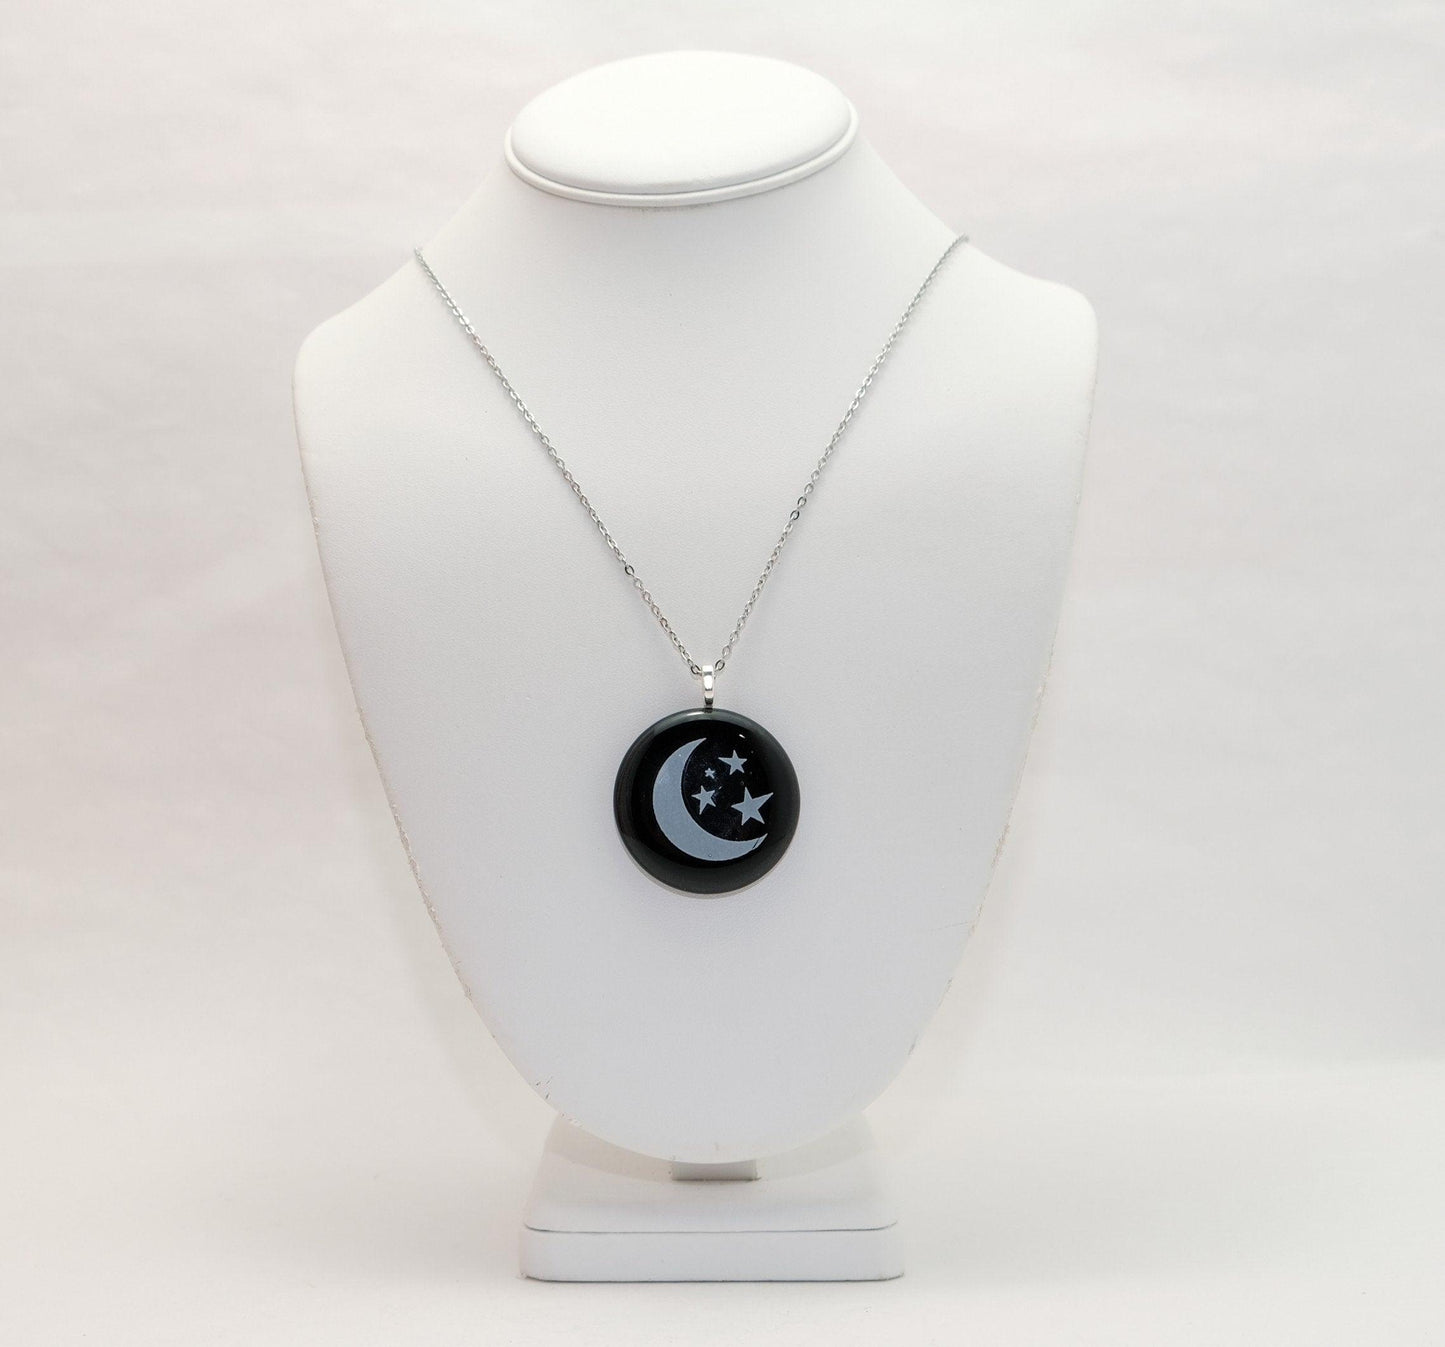 Celestial Chic: White Crescent Moon and Stars on Black Fused Glass Pendant necklace on 20 inch Steel Chain seeds glassworks seeds glassworks